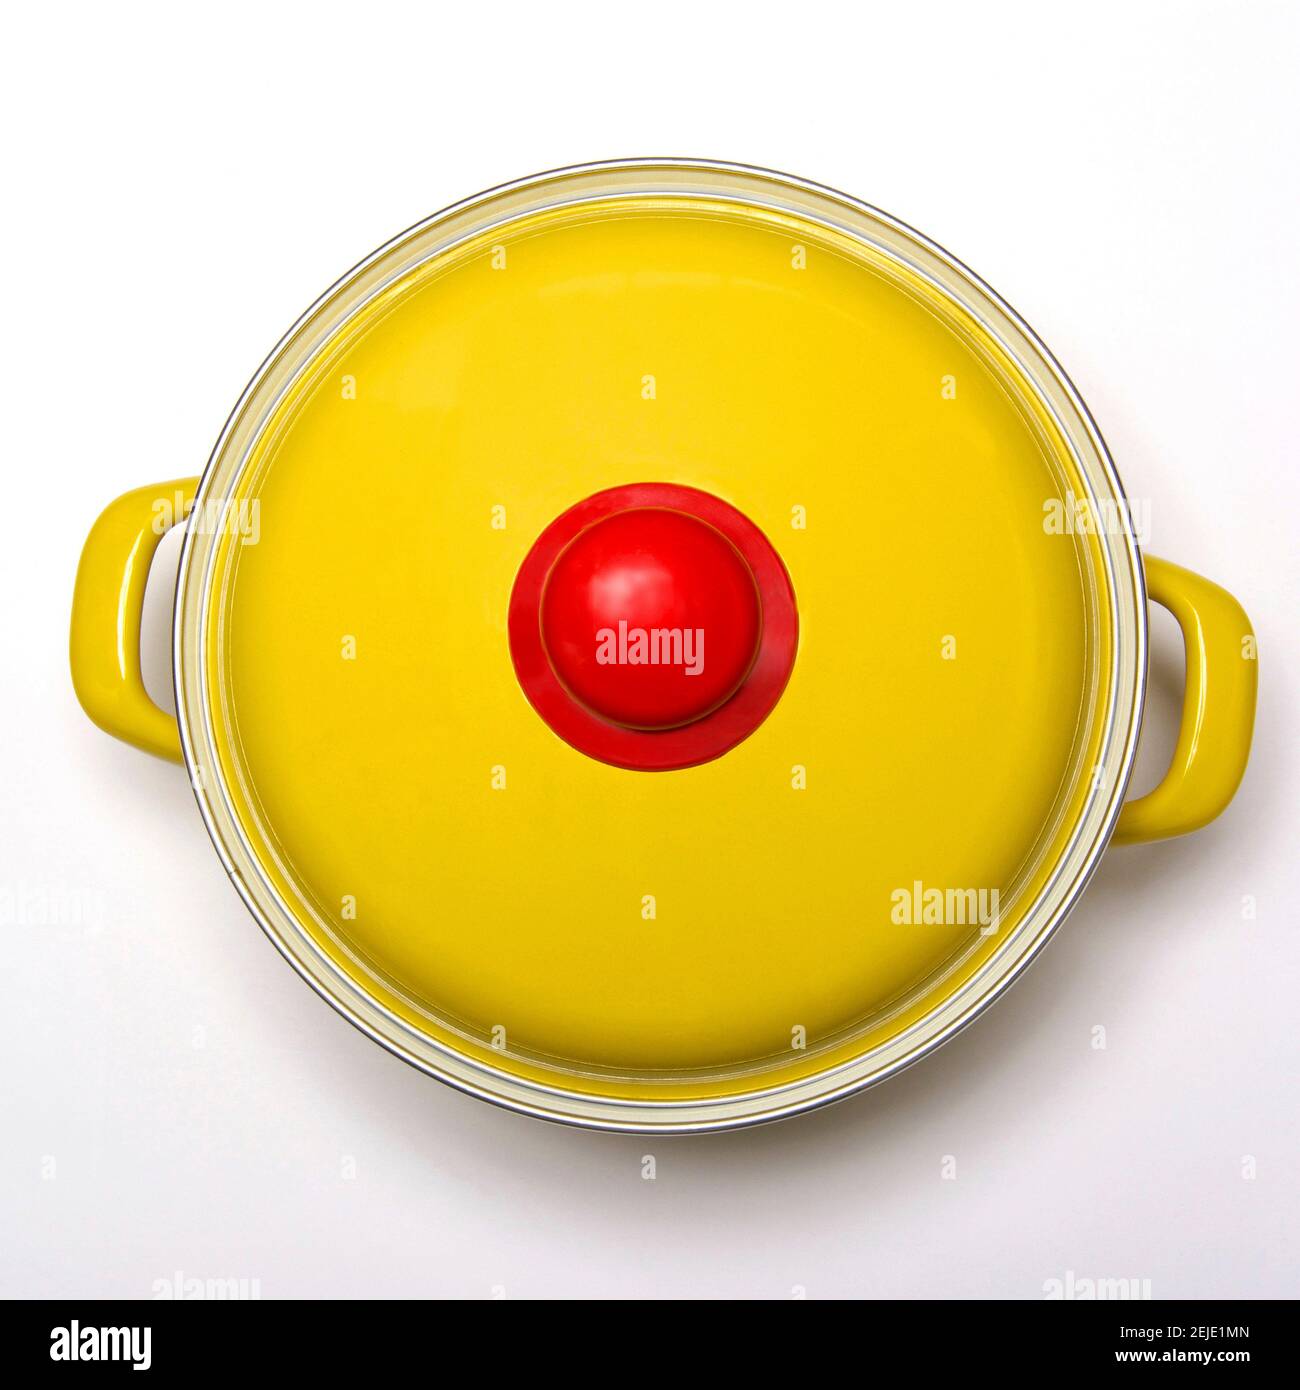 https://c8.alamy.com/comp/2EJE1MN/yellow-saucepan-with-lid-on-white-background-2EJE1MN.jpg